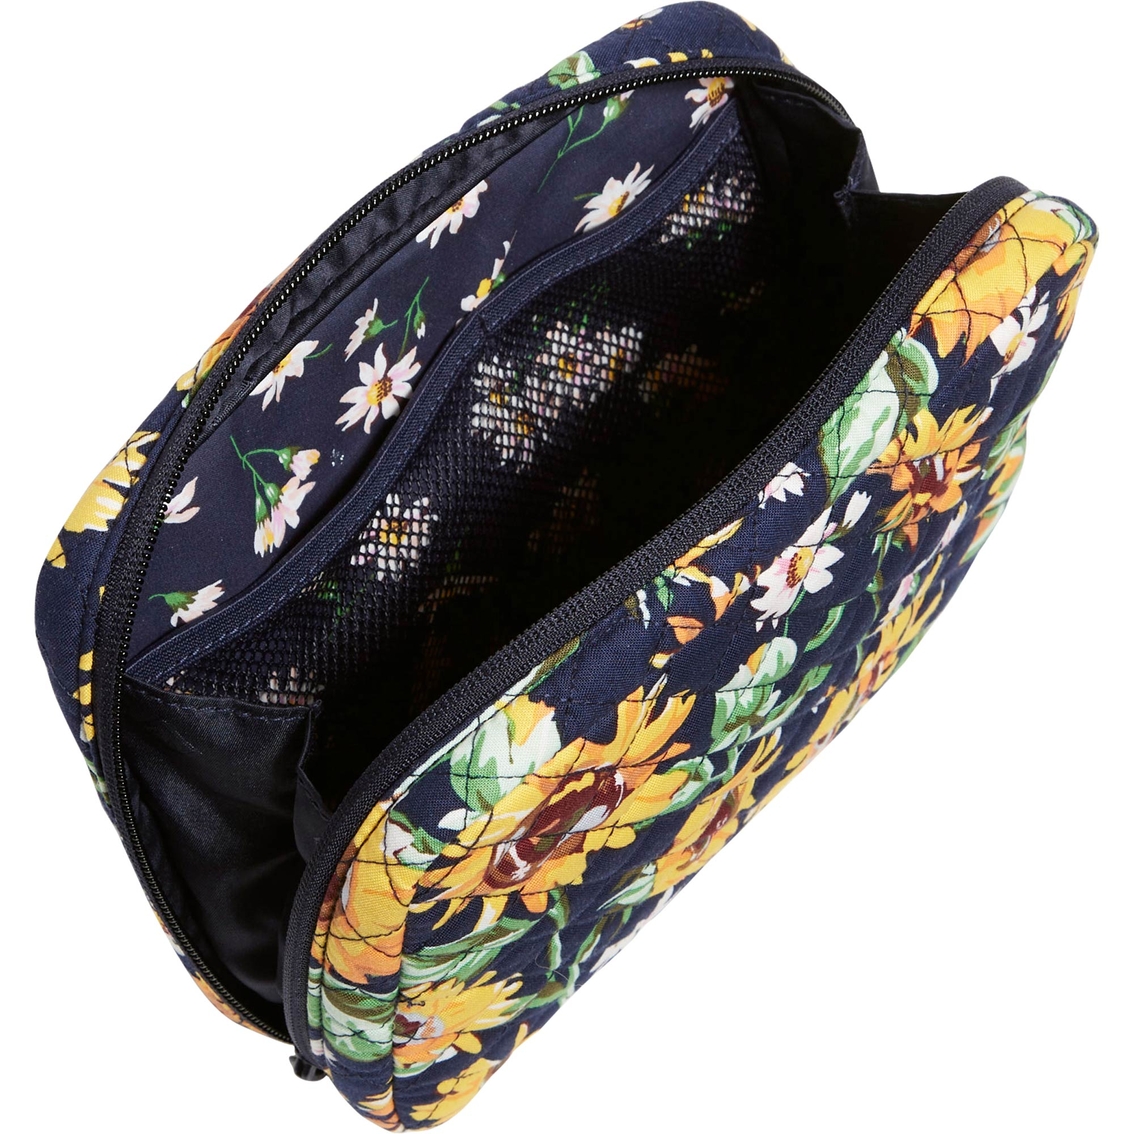 Vera Bradley Cord Organizer In Recycled Cotton, Sunflowers | Personal ...